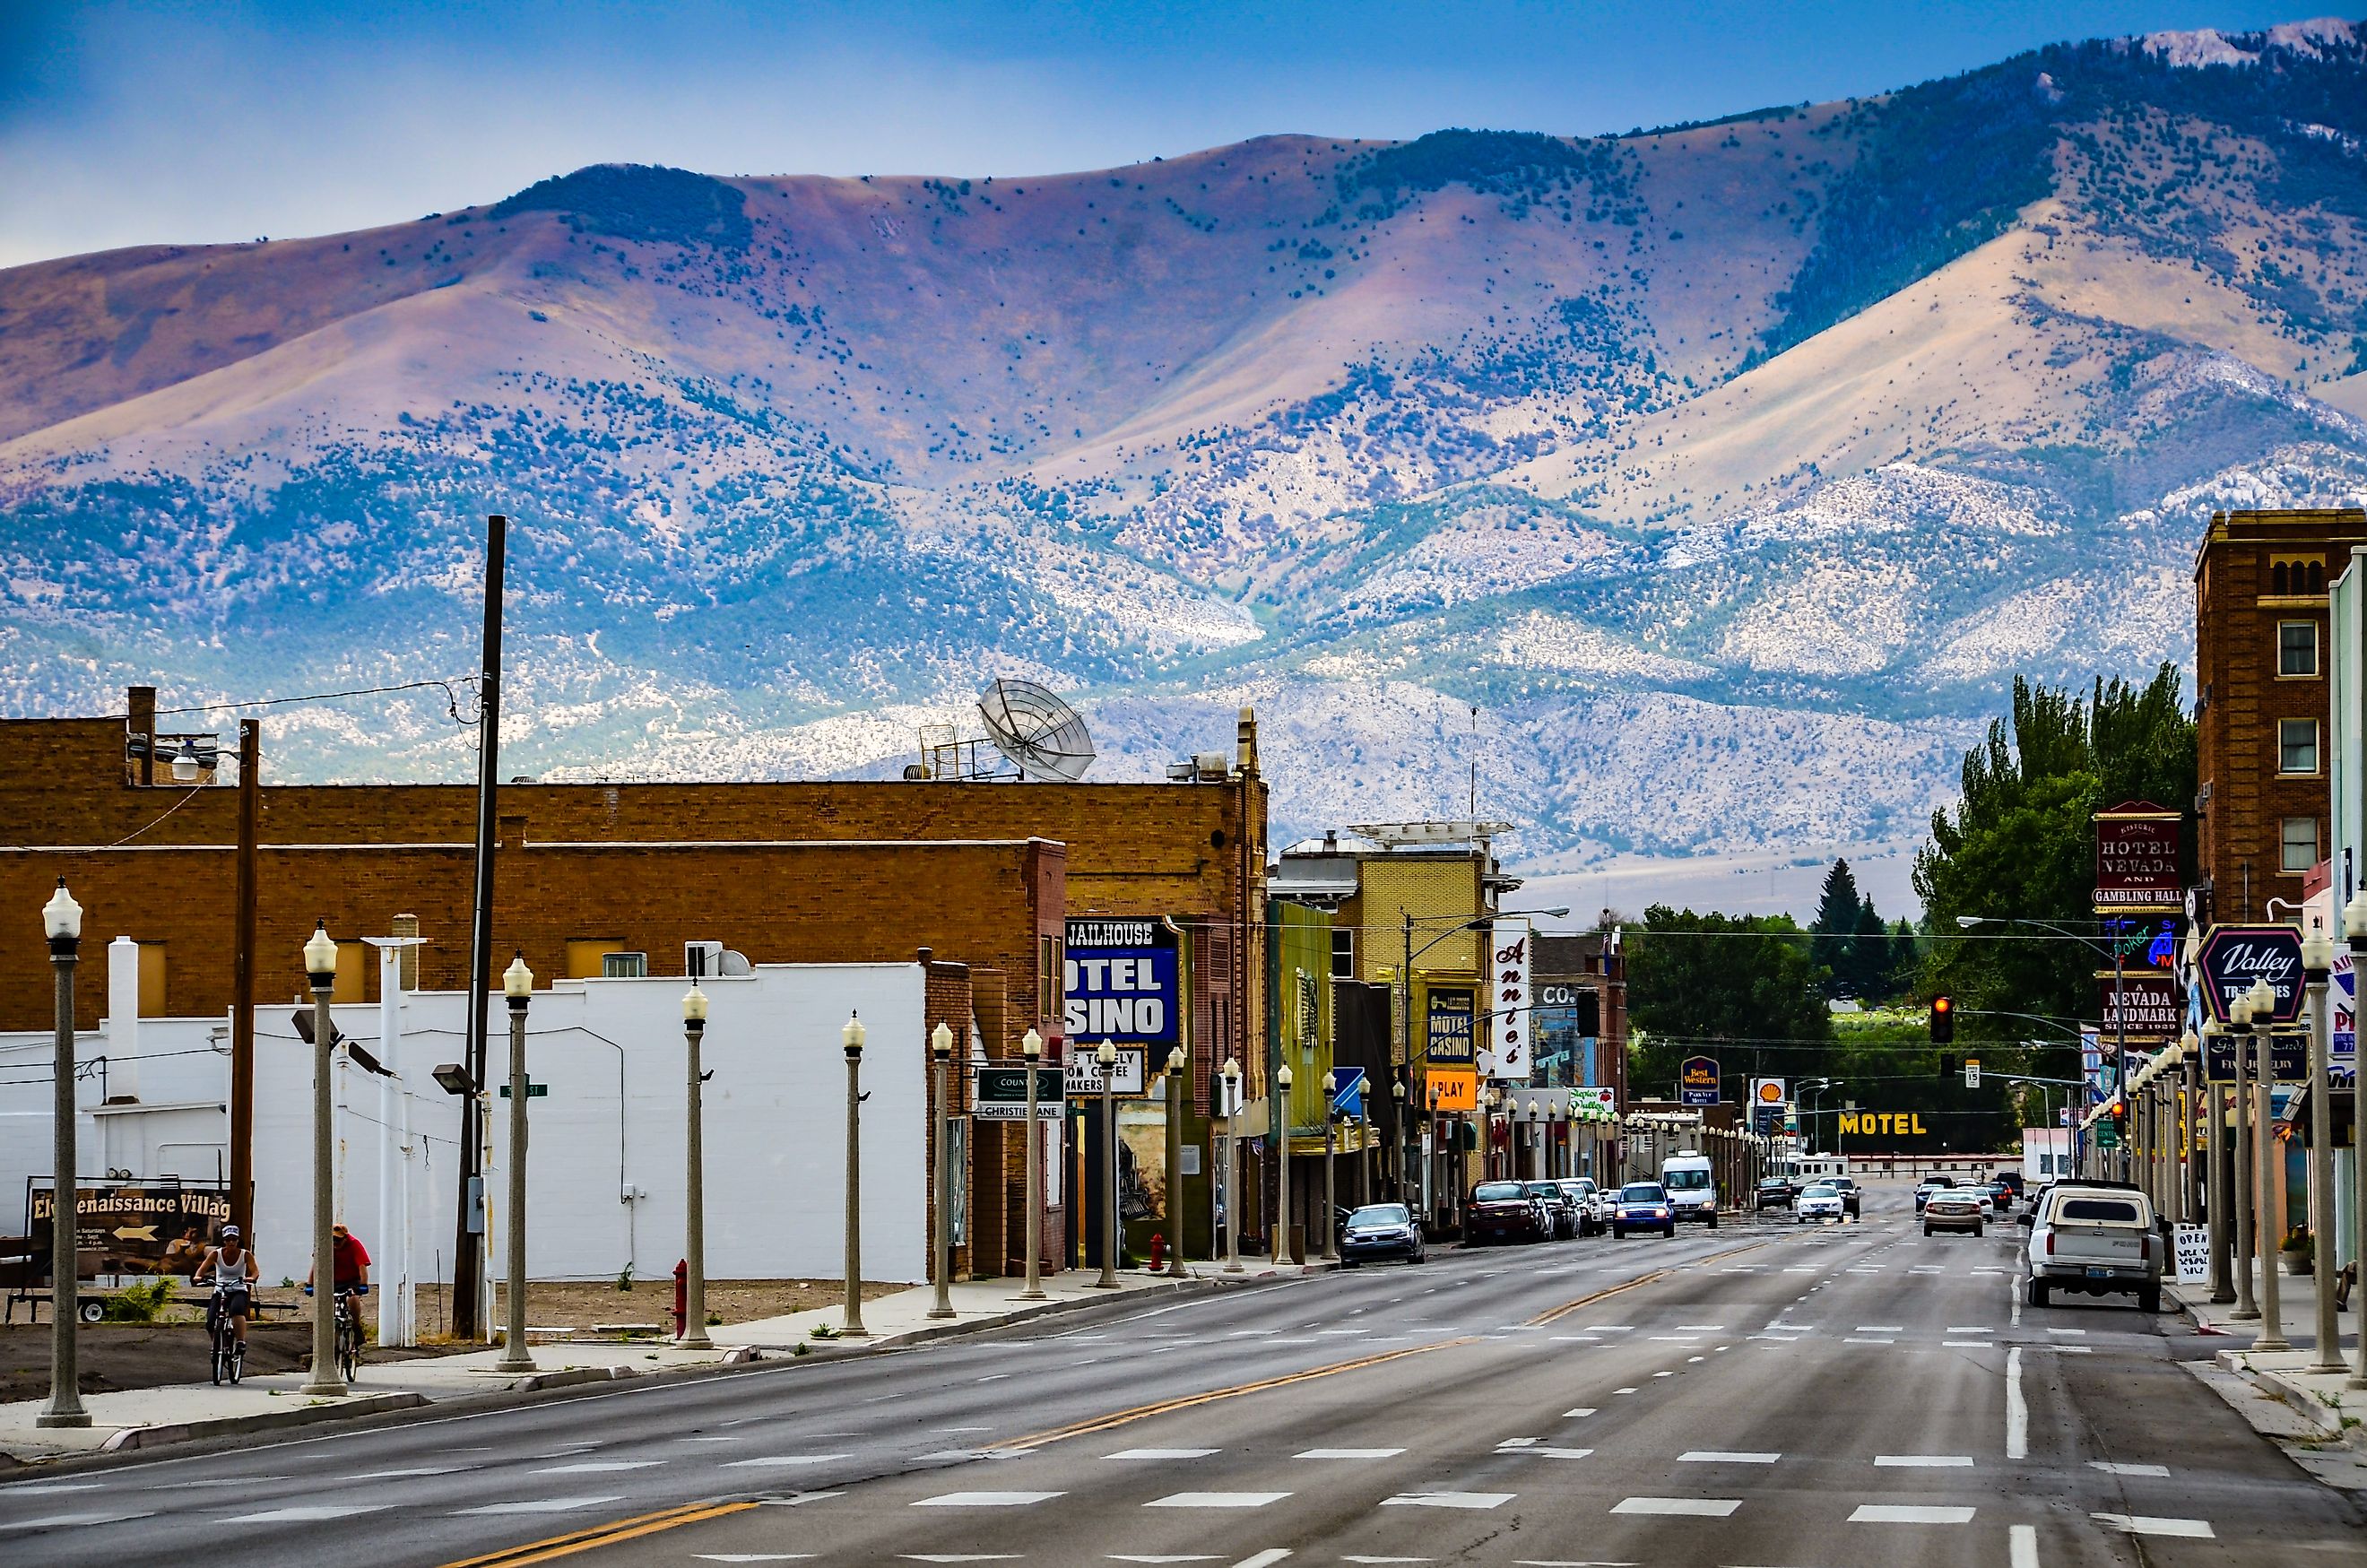 Route 50, the main street in western town of Ely, Nevada. Editorial credit: Sandra Foyt / Shutterstock.com